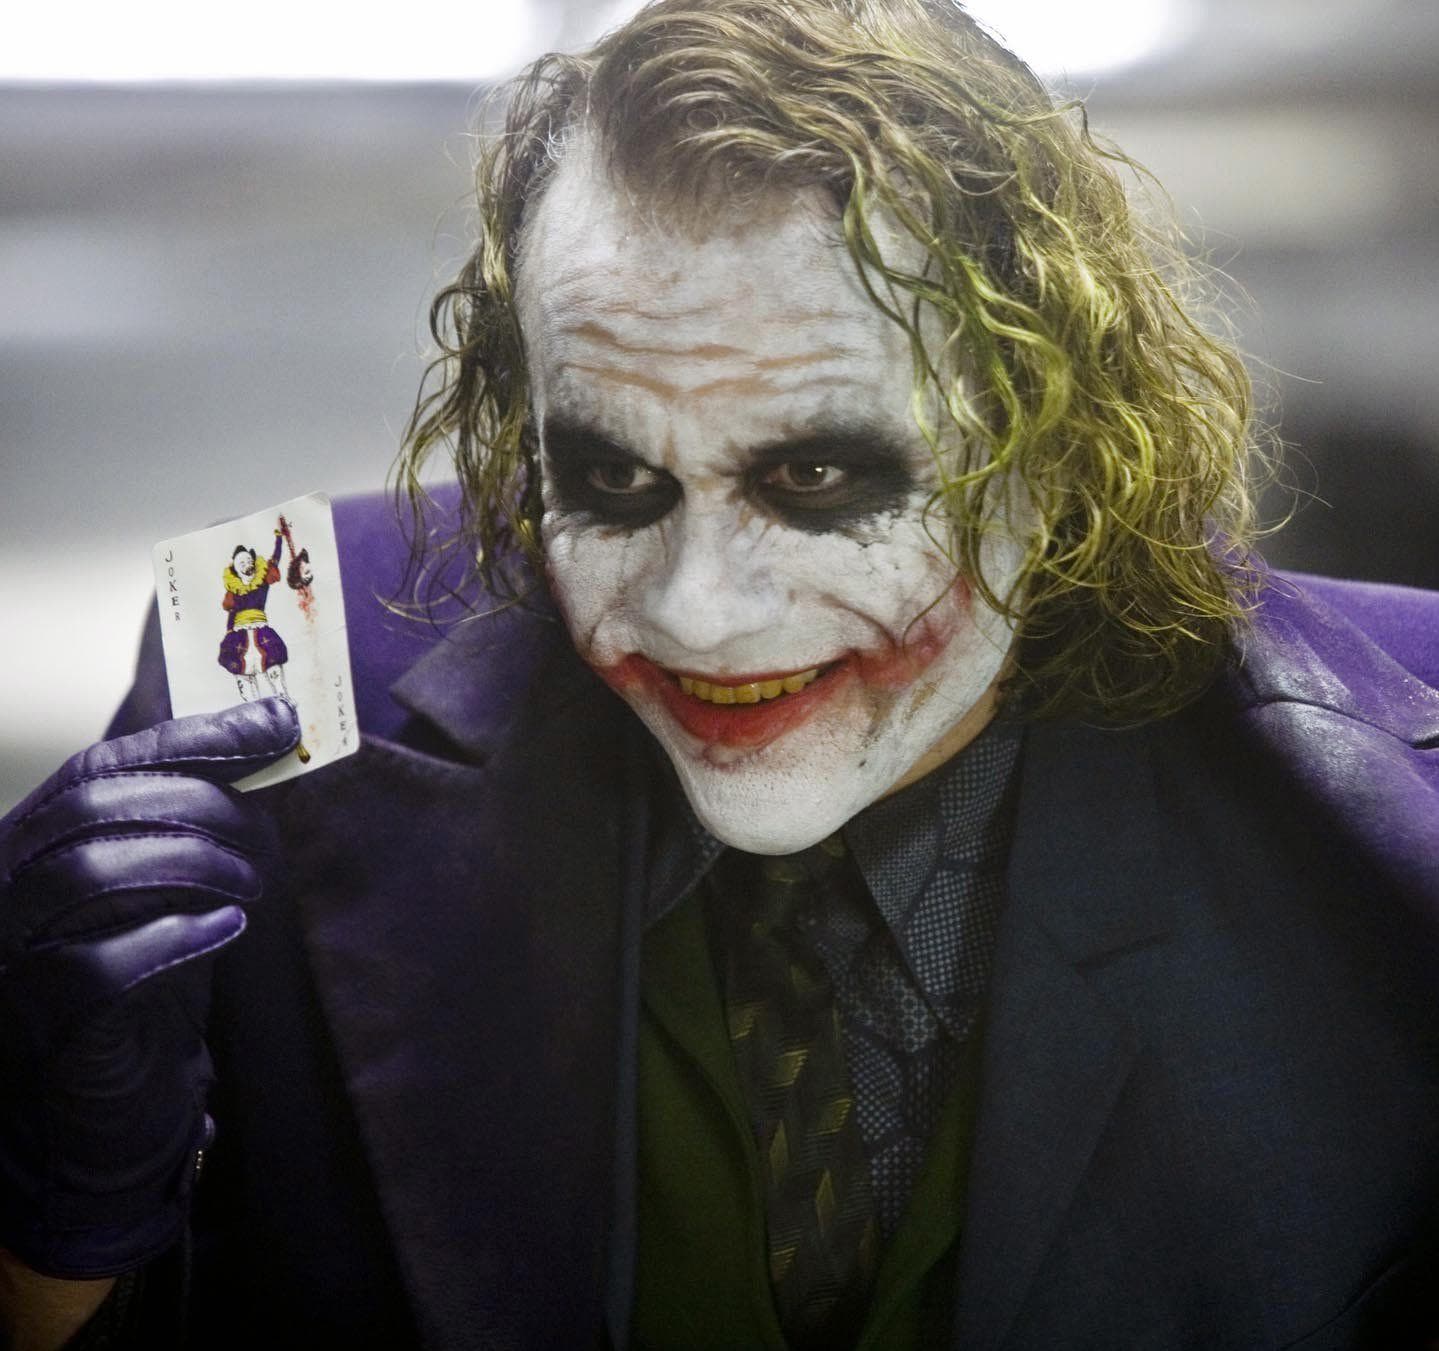 All Actors Who Have Played Joker Ranked Best To Worst By Fans